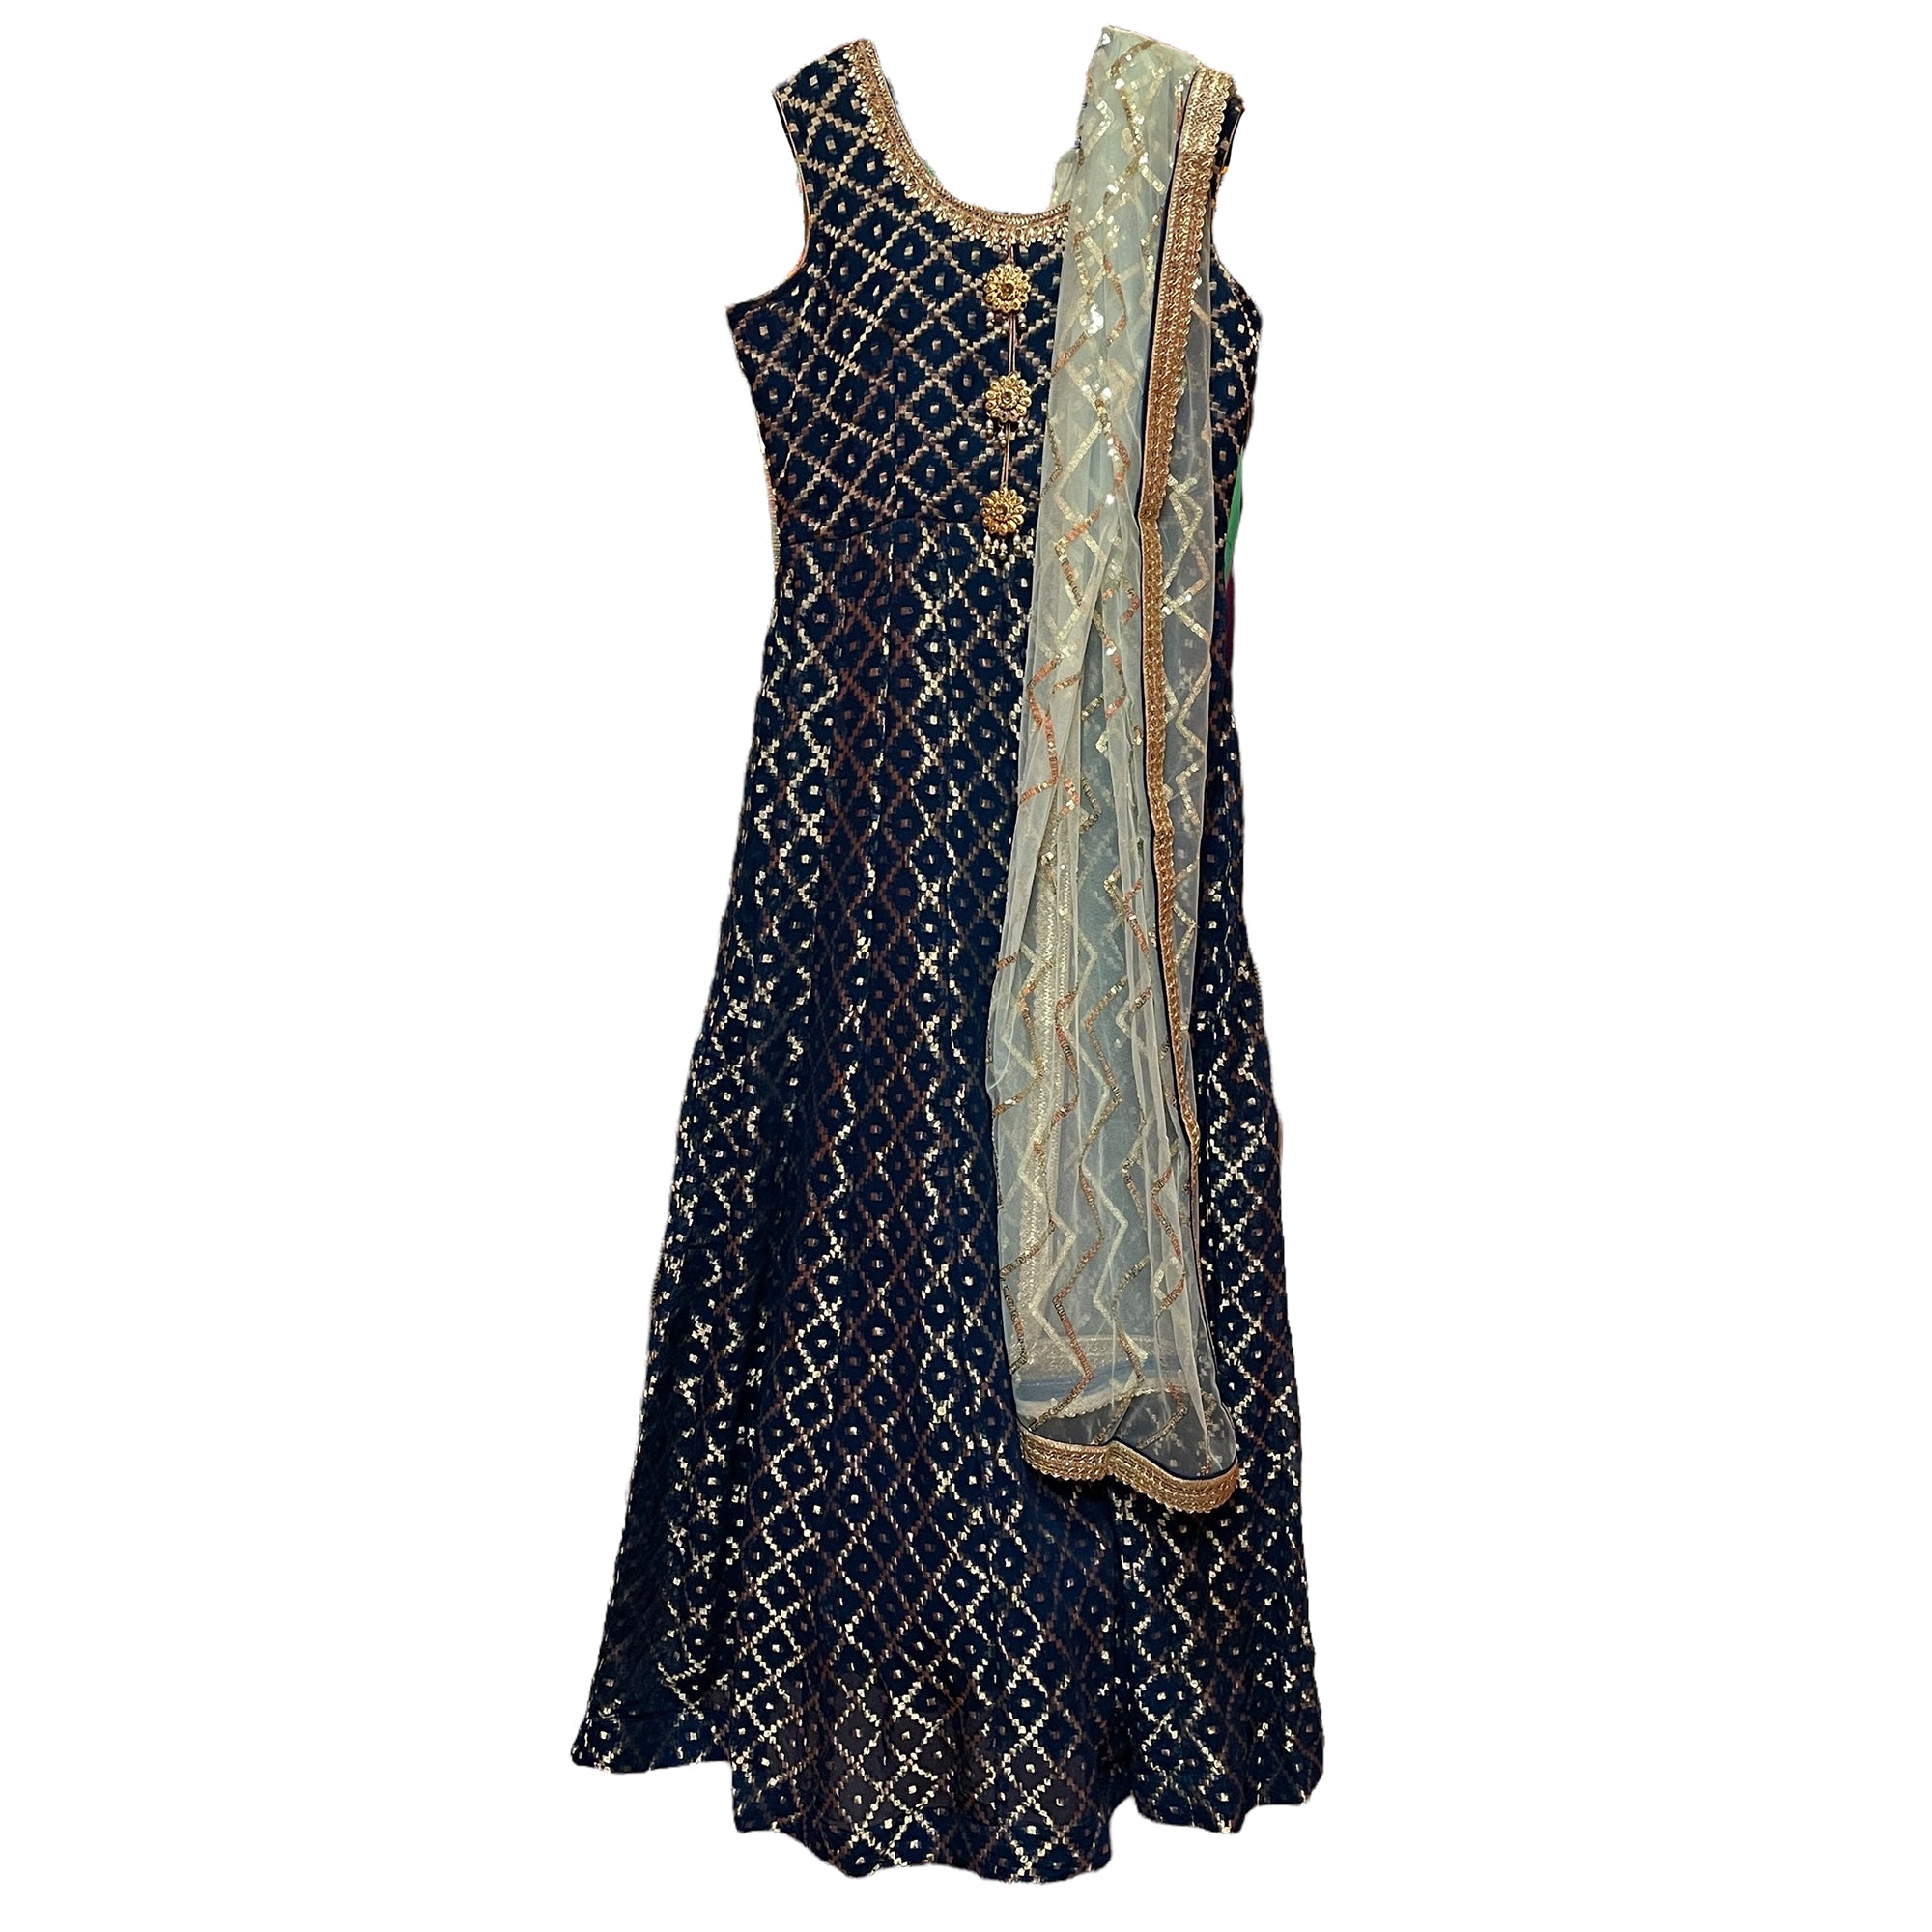 DT Navy & Gold Gown - Vintage India NYC